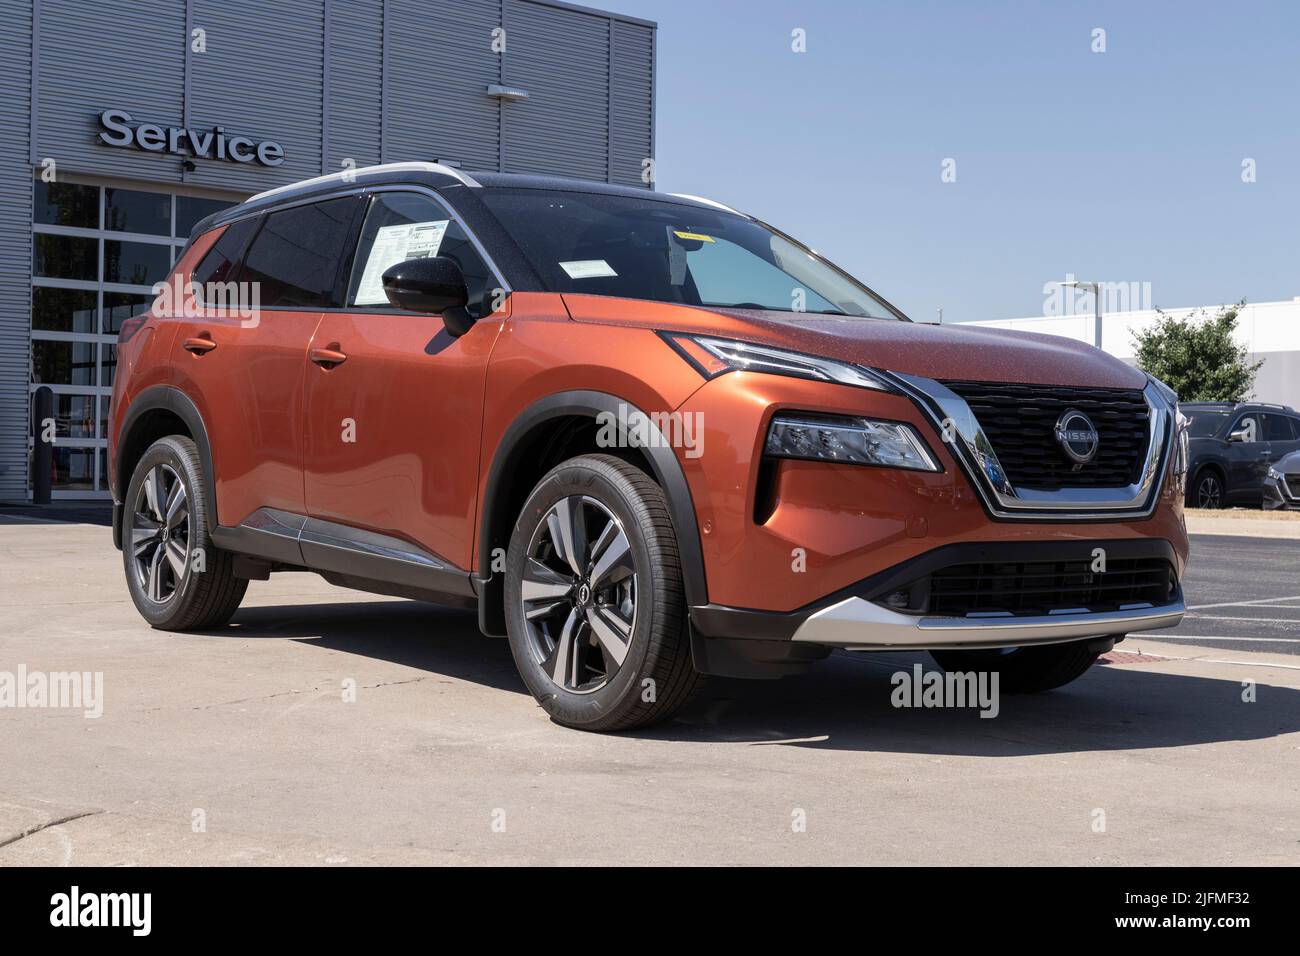 Avon - Circa July 2022: Nissan Rogue display. Nissan offers the Rogue in S, SV, SL and Premium models. Stock Photo